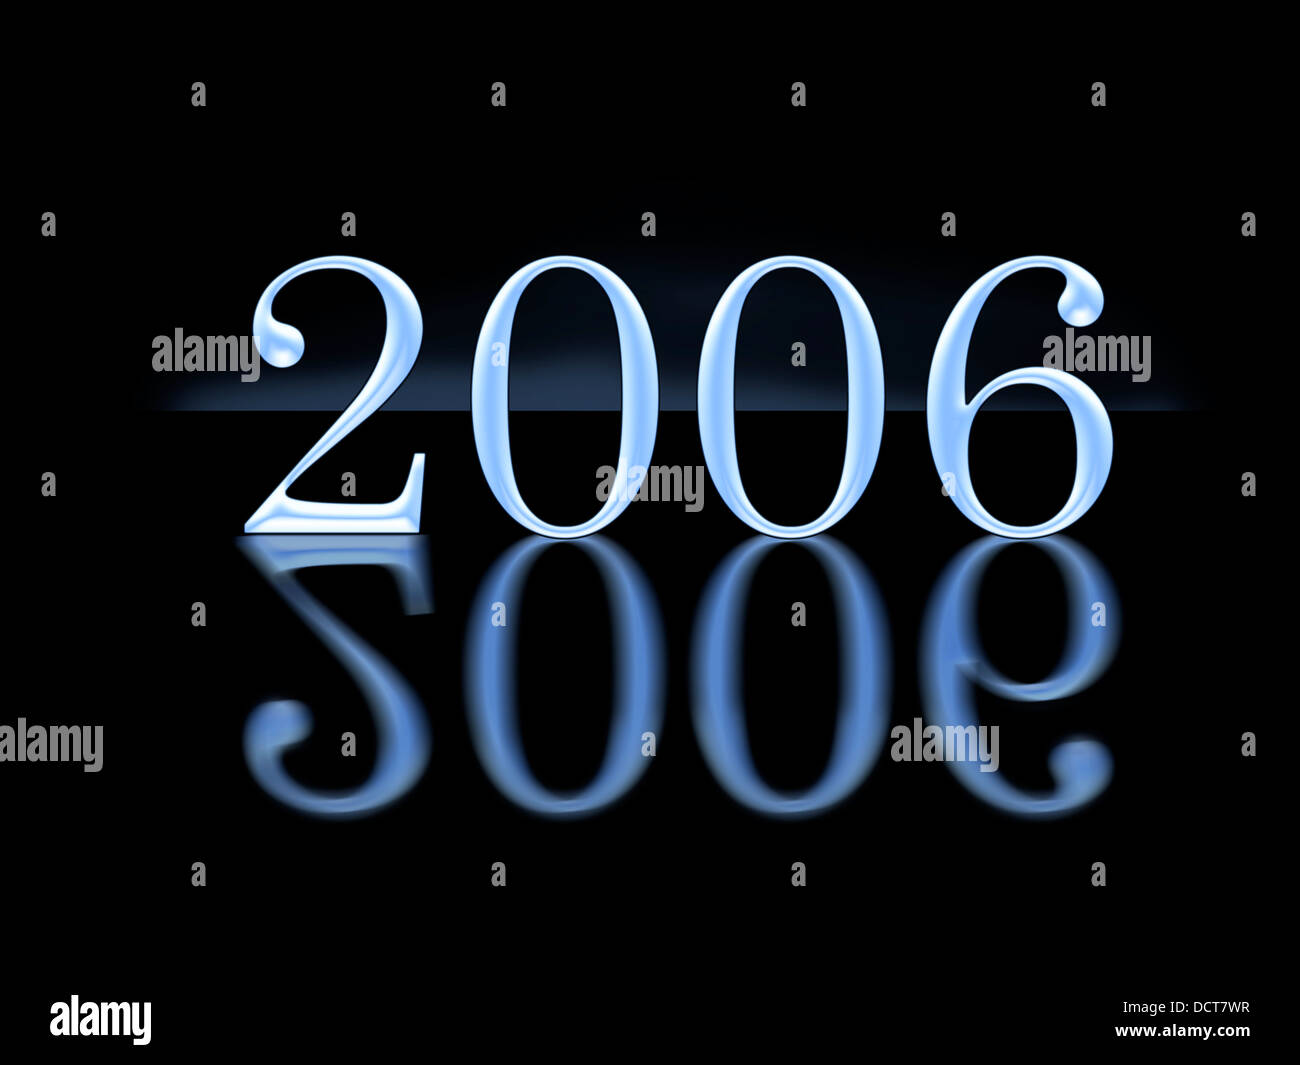 brand new year 2006 with reflection Stock Photo